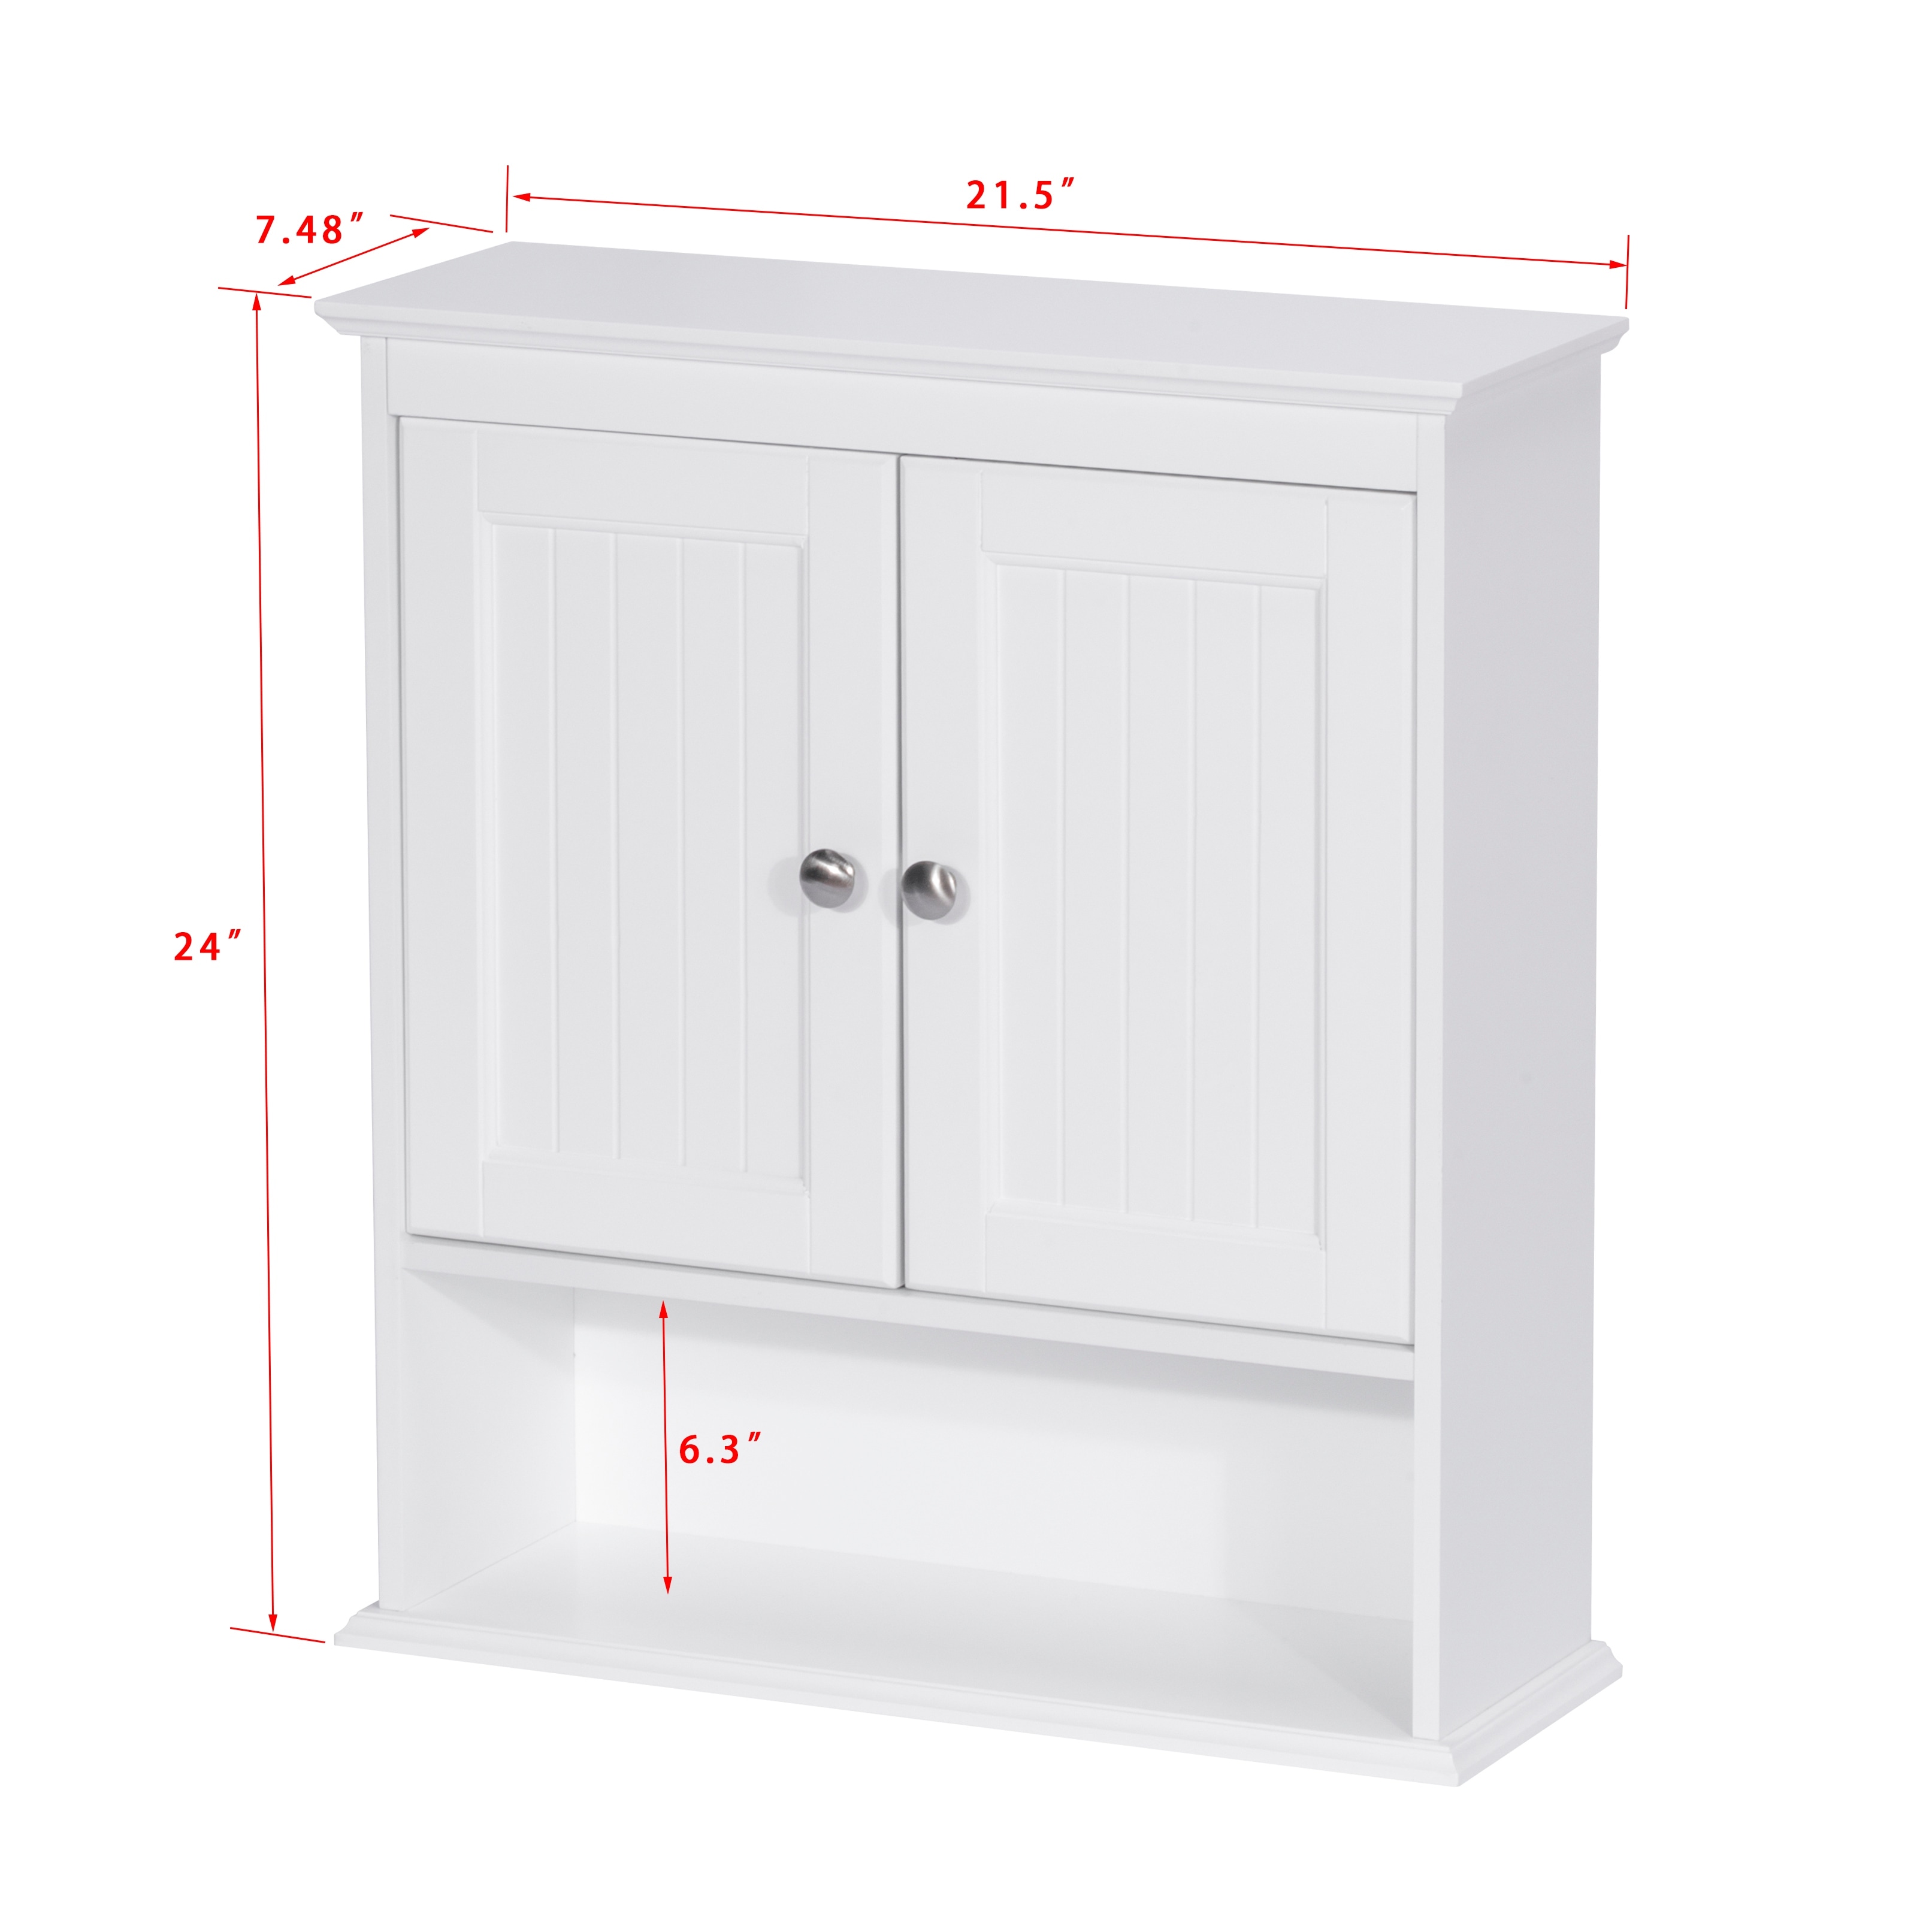 https://ak1.ostkcdn.com/images/products/is/images/direct/ee71a88250c92f5c75f7e9458ff367b3e2ba953e/Spirich-Home-Bathroom-Two-Doo-Wall-Cabinet%2C-Wood-Hanging-Cabinet%2C-Wall-Cabinets-with-Doors-and-Shelves-Over-The-Toilet%2C-White.jpg